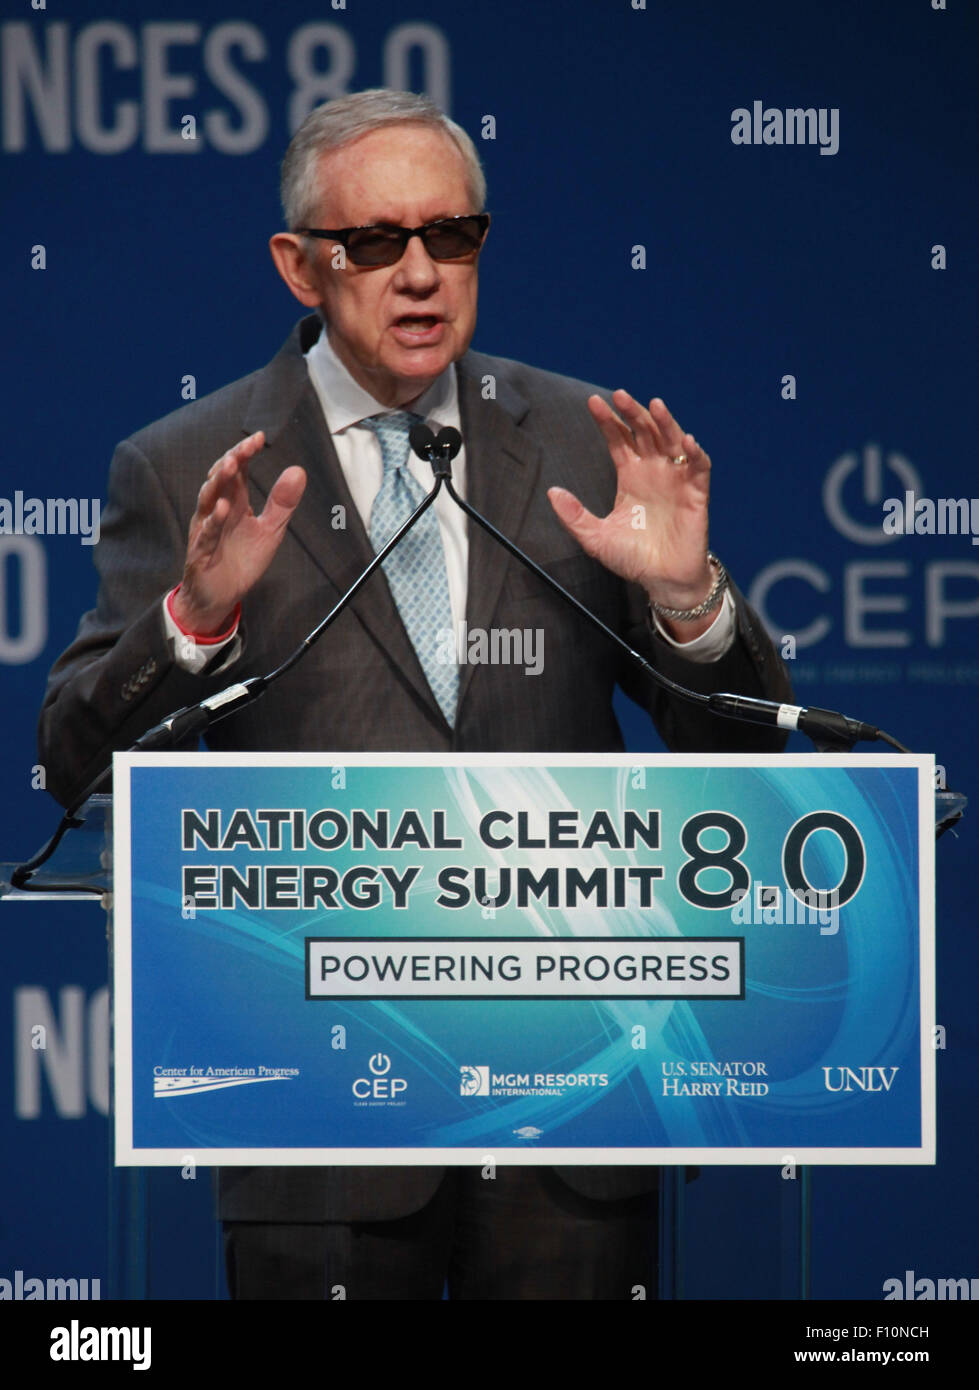 Aug. 24, 2015 - Las Vegas, Nevada, United States of America - Senator Harry Reid (D, NV) makes the opening remarks to start  the 2015 National Clean Energy Summit 8.0 on August 24, 2015  at Mandalay Bay Convention Center in LasVegas, Nevada. (Credit Image: © Marcel Thomas via ZUMA Wire) Stock Photo